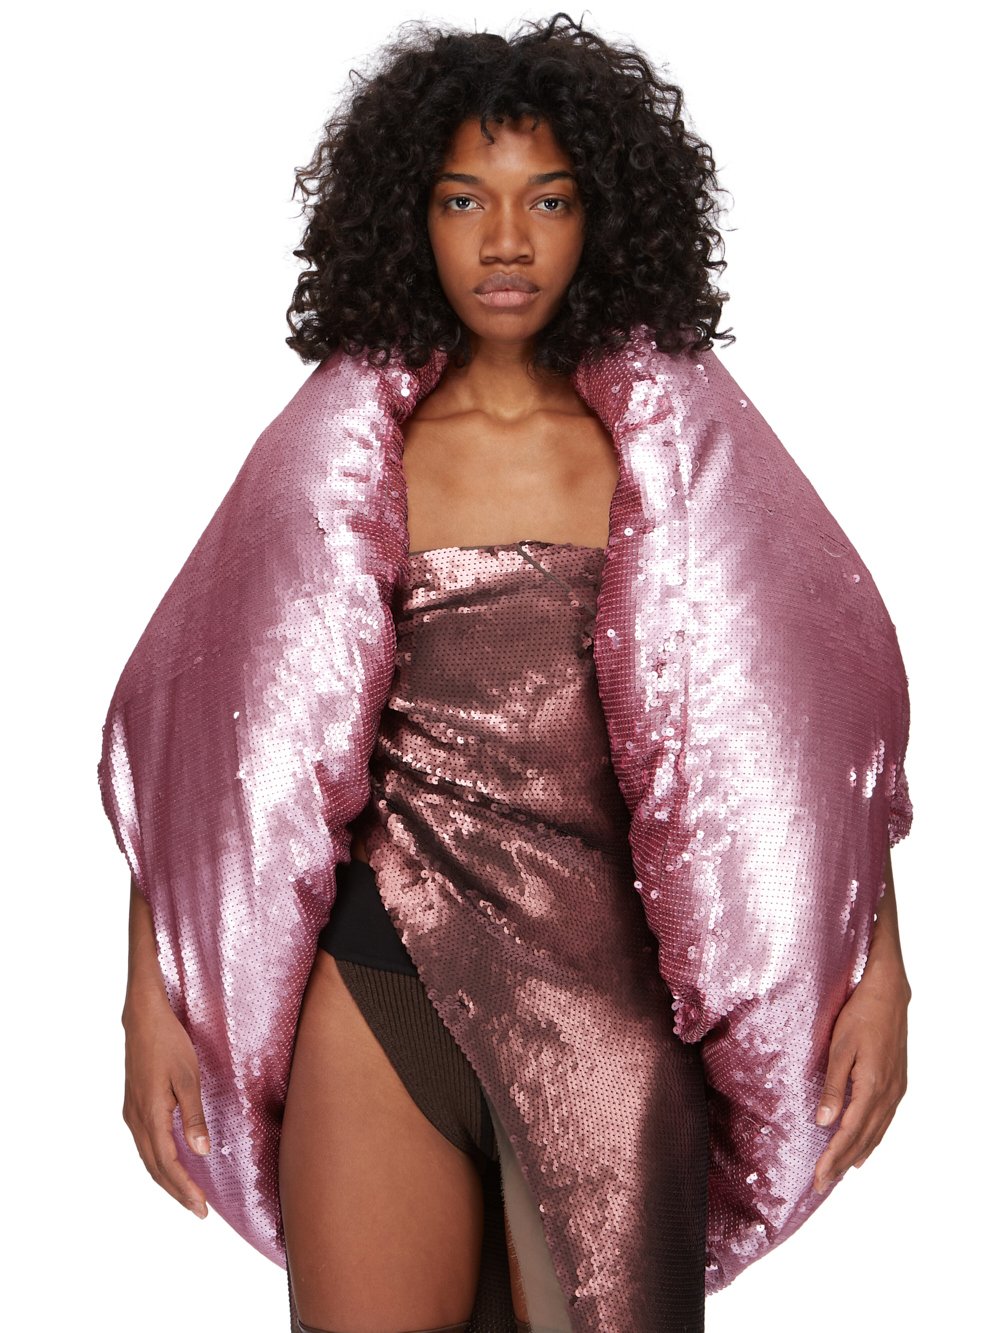 RICK OWENS FW23 LUXOR RUNWAY DONUT IN MAUVE AND PINK SEQUIN EMBROIDERED RECYCLED NYLON